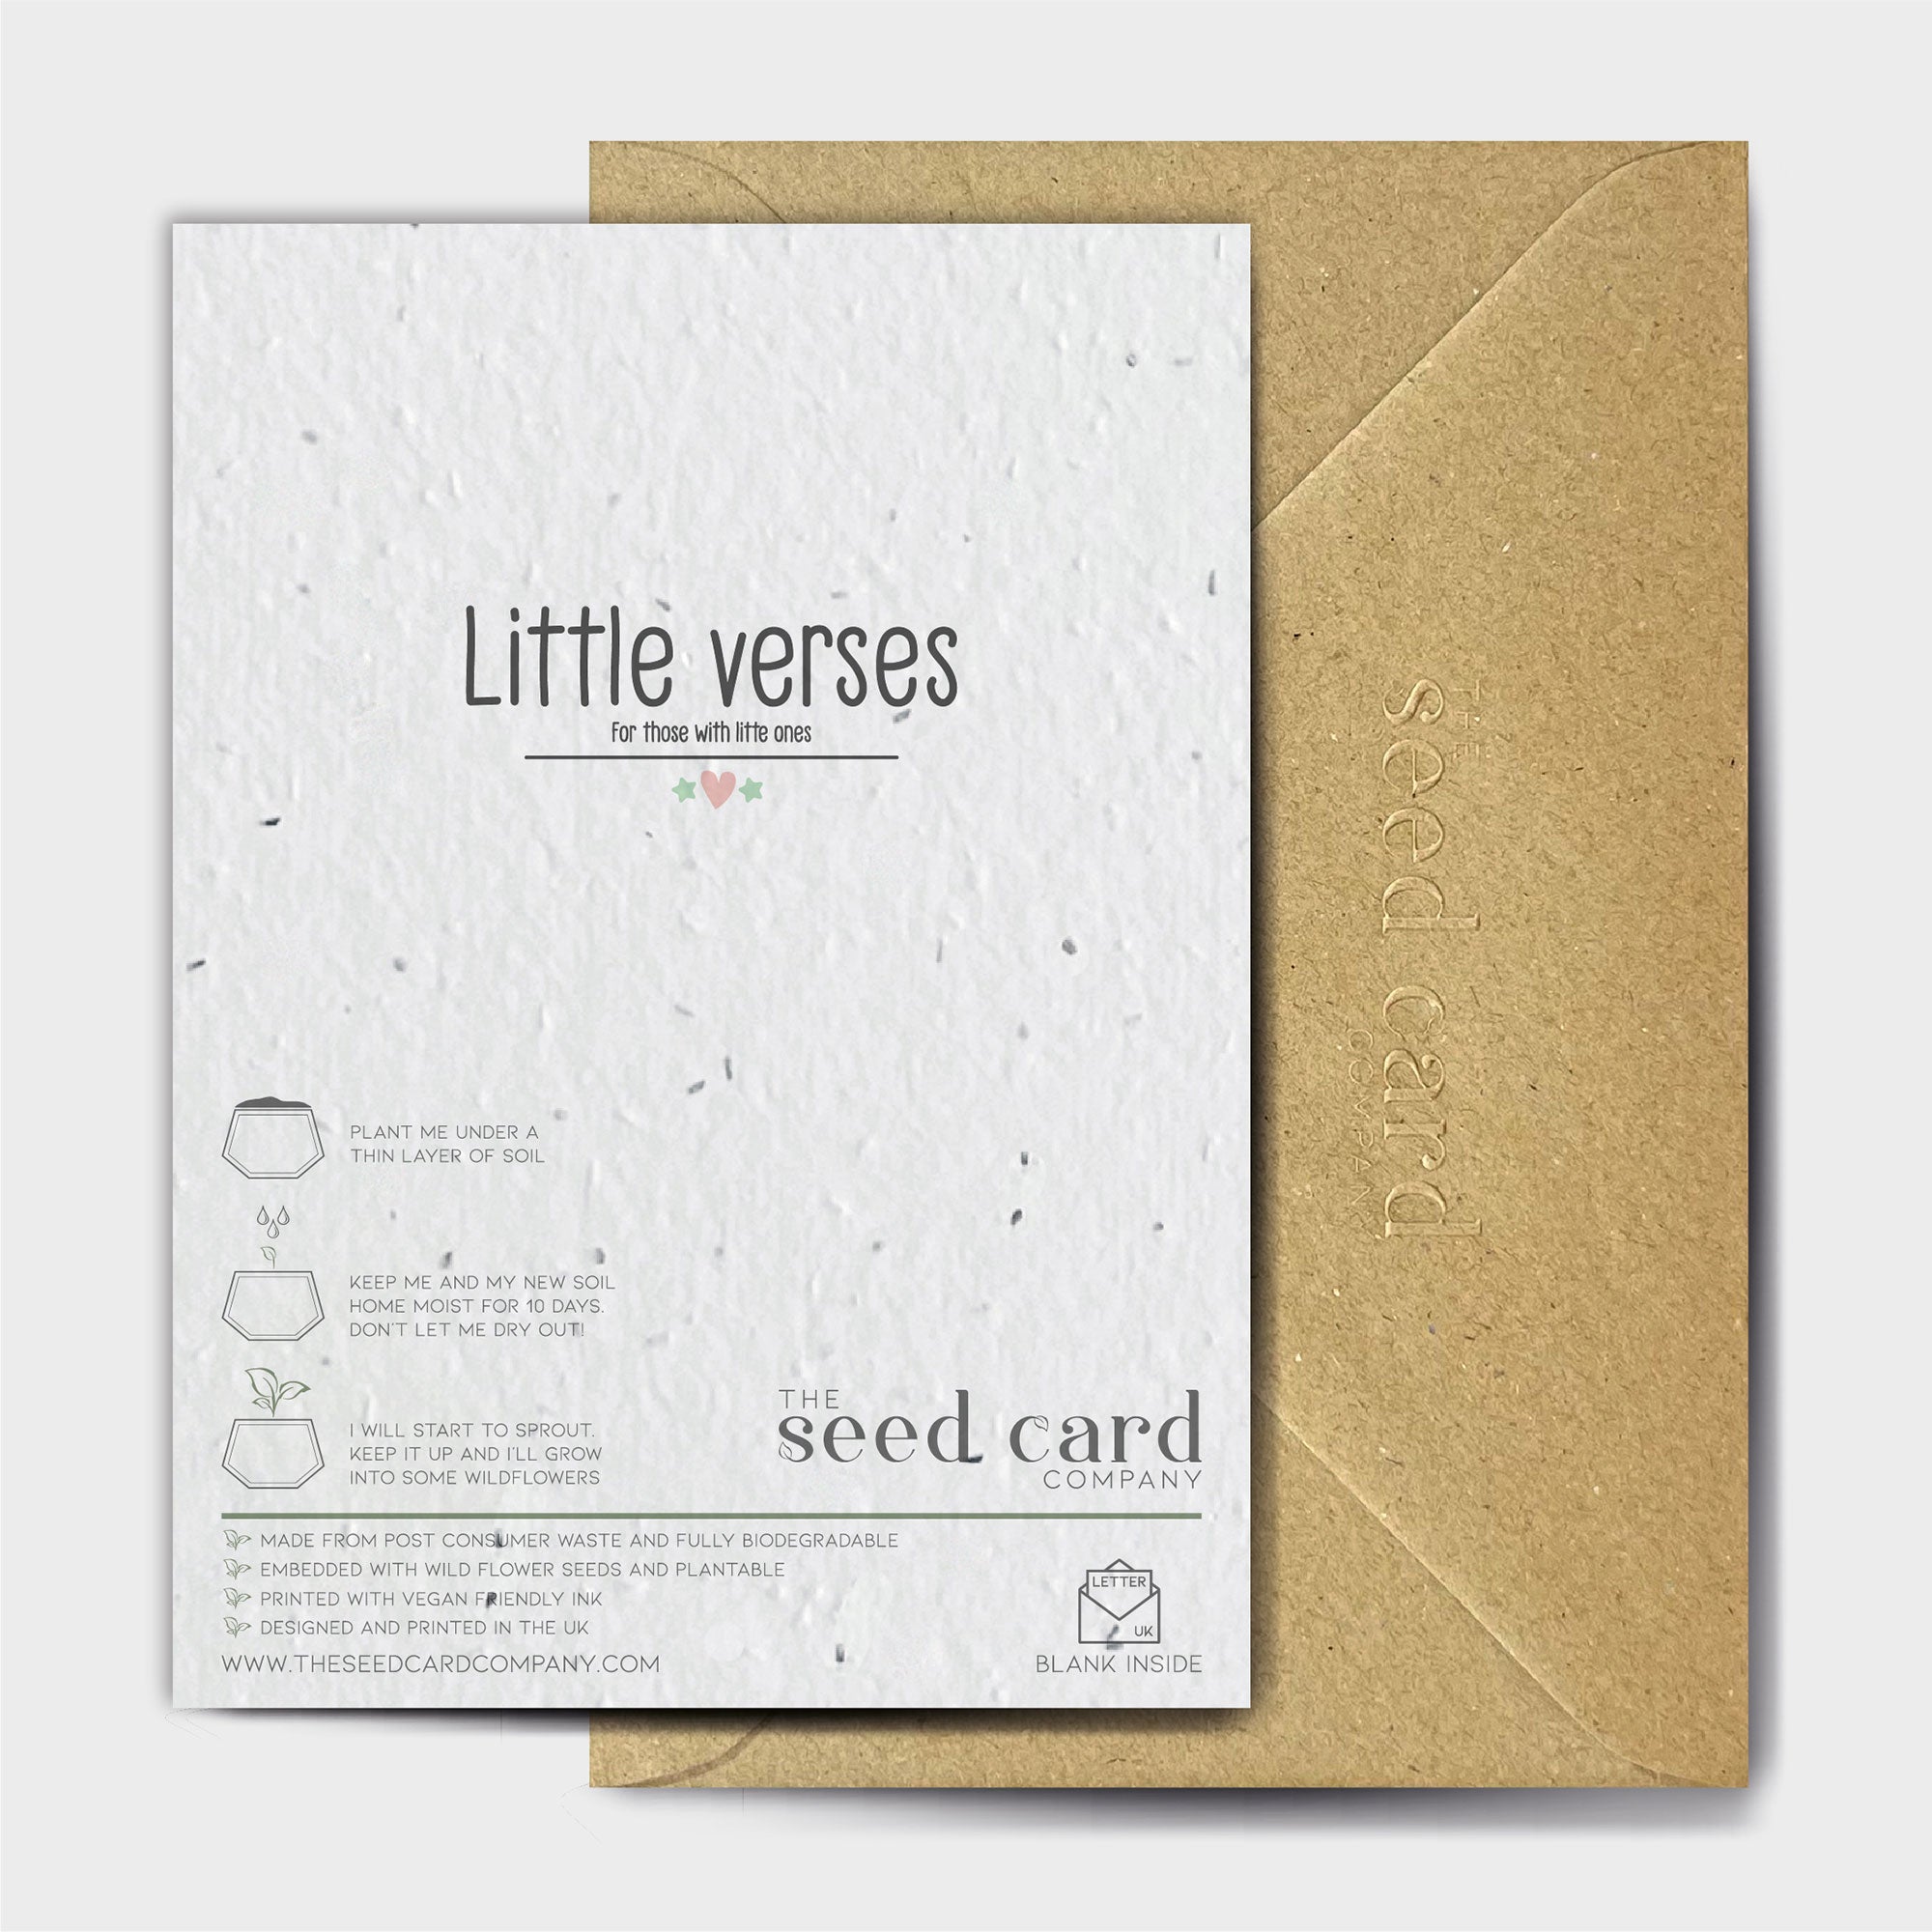 Shop online Zoom Zoom Zoom - 100% biodegradable seed-embedded cards Shop -The Seed Card Company